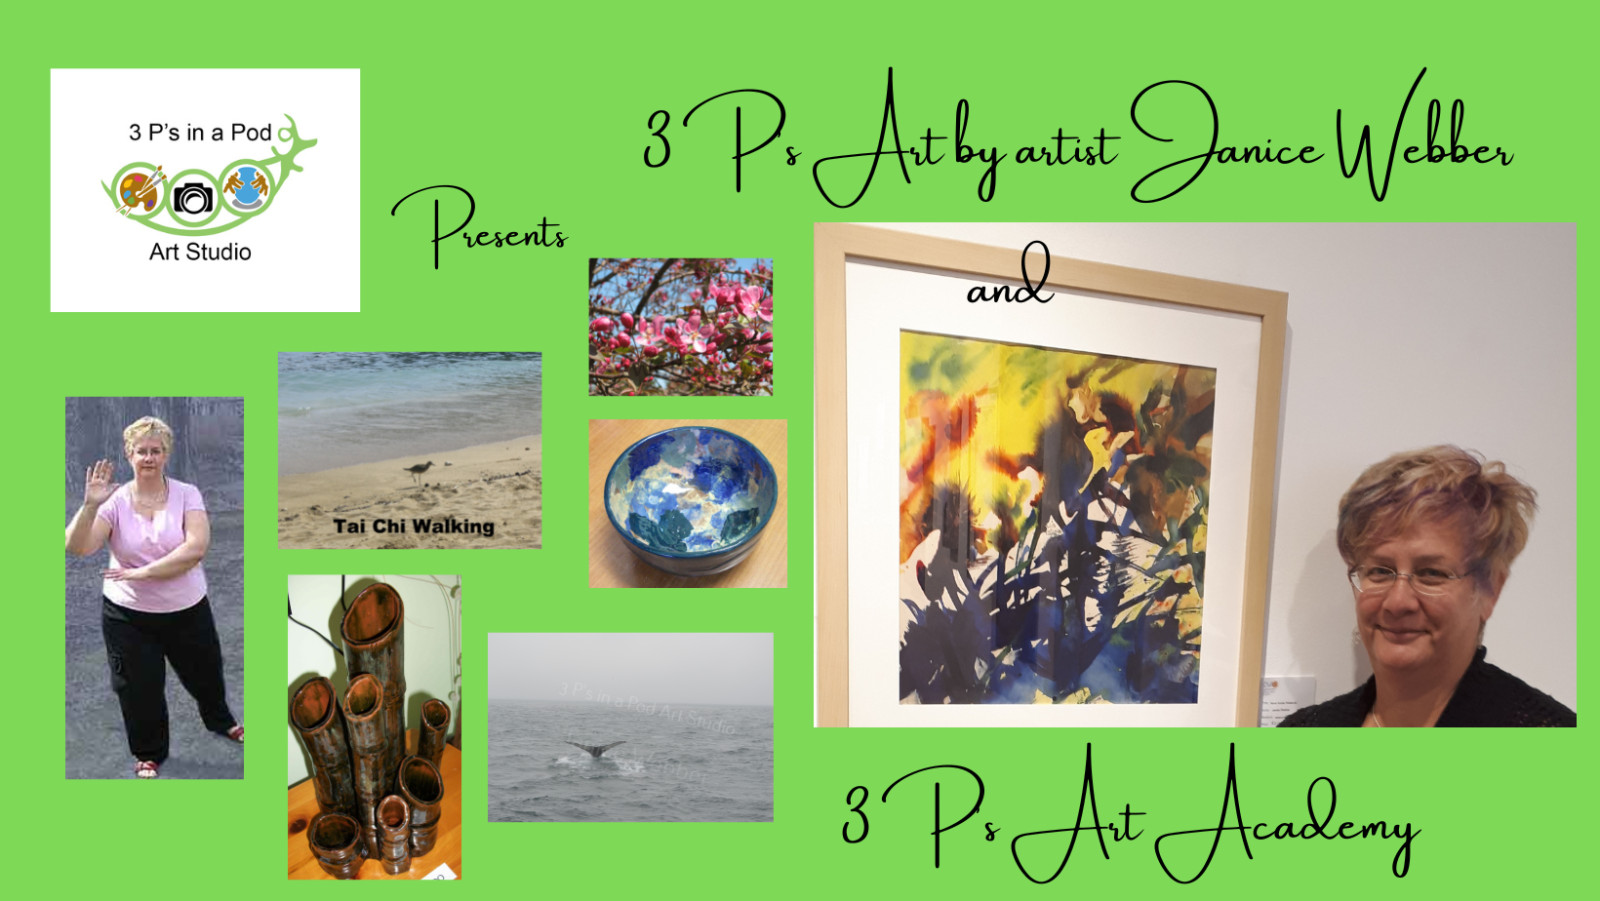 What's new at 3 P's in a Pod Art Studio - part 2